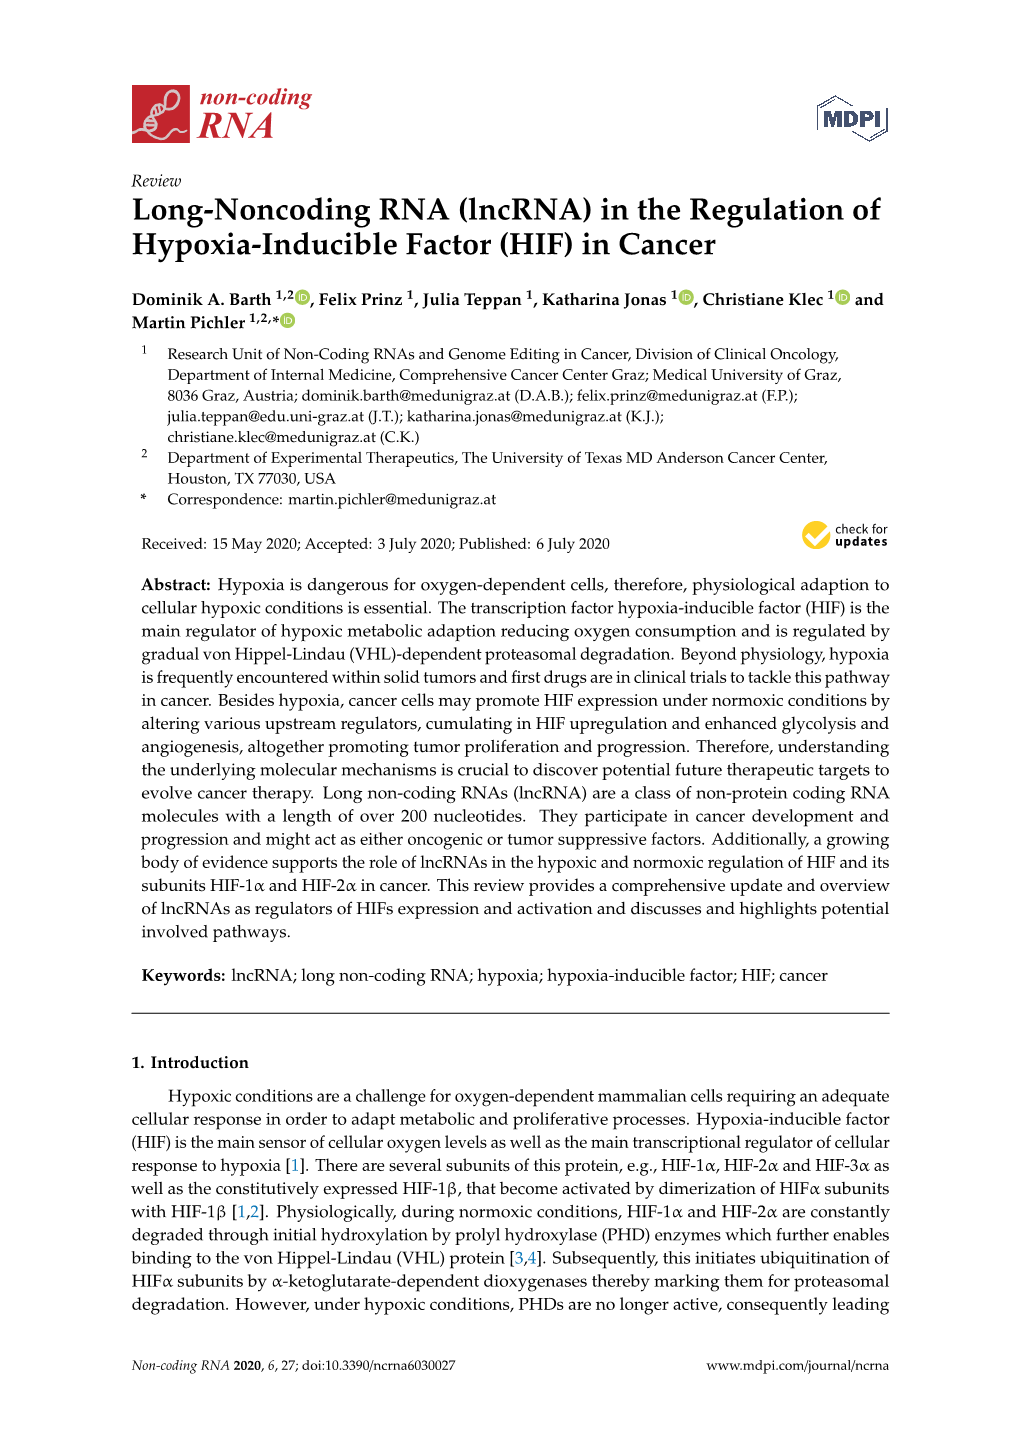 (Lncrna) in the Regulation of Hypoxia-Inducible Factor (HIF) in Cancer